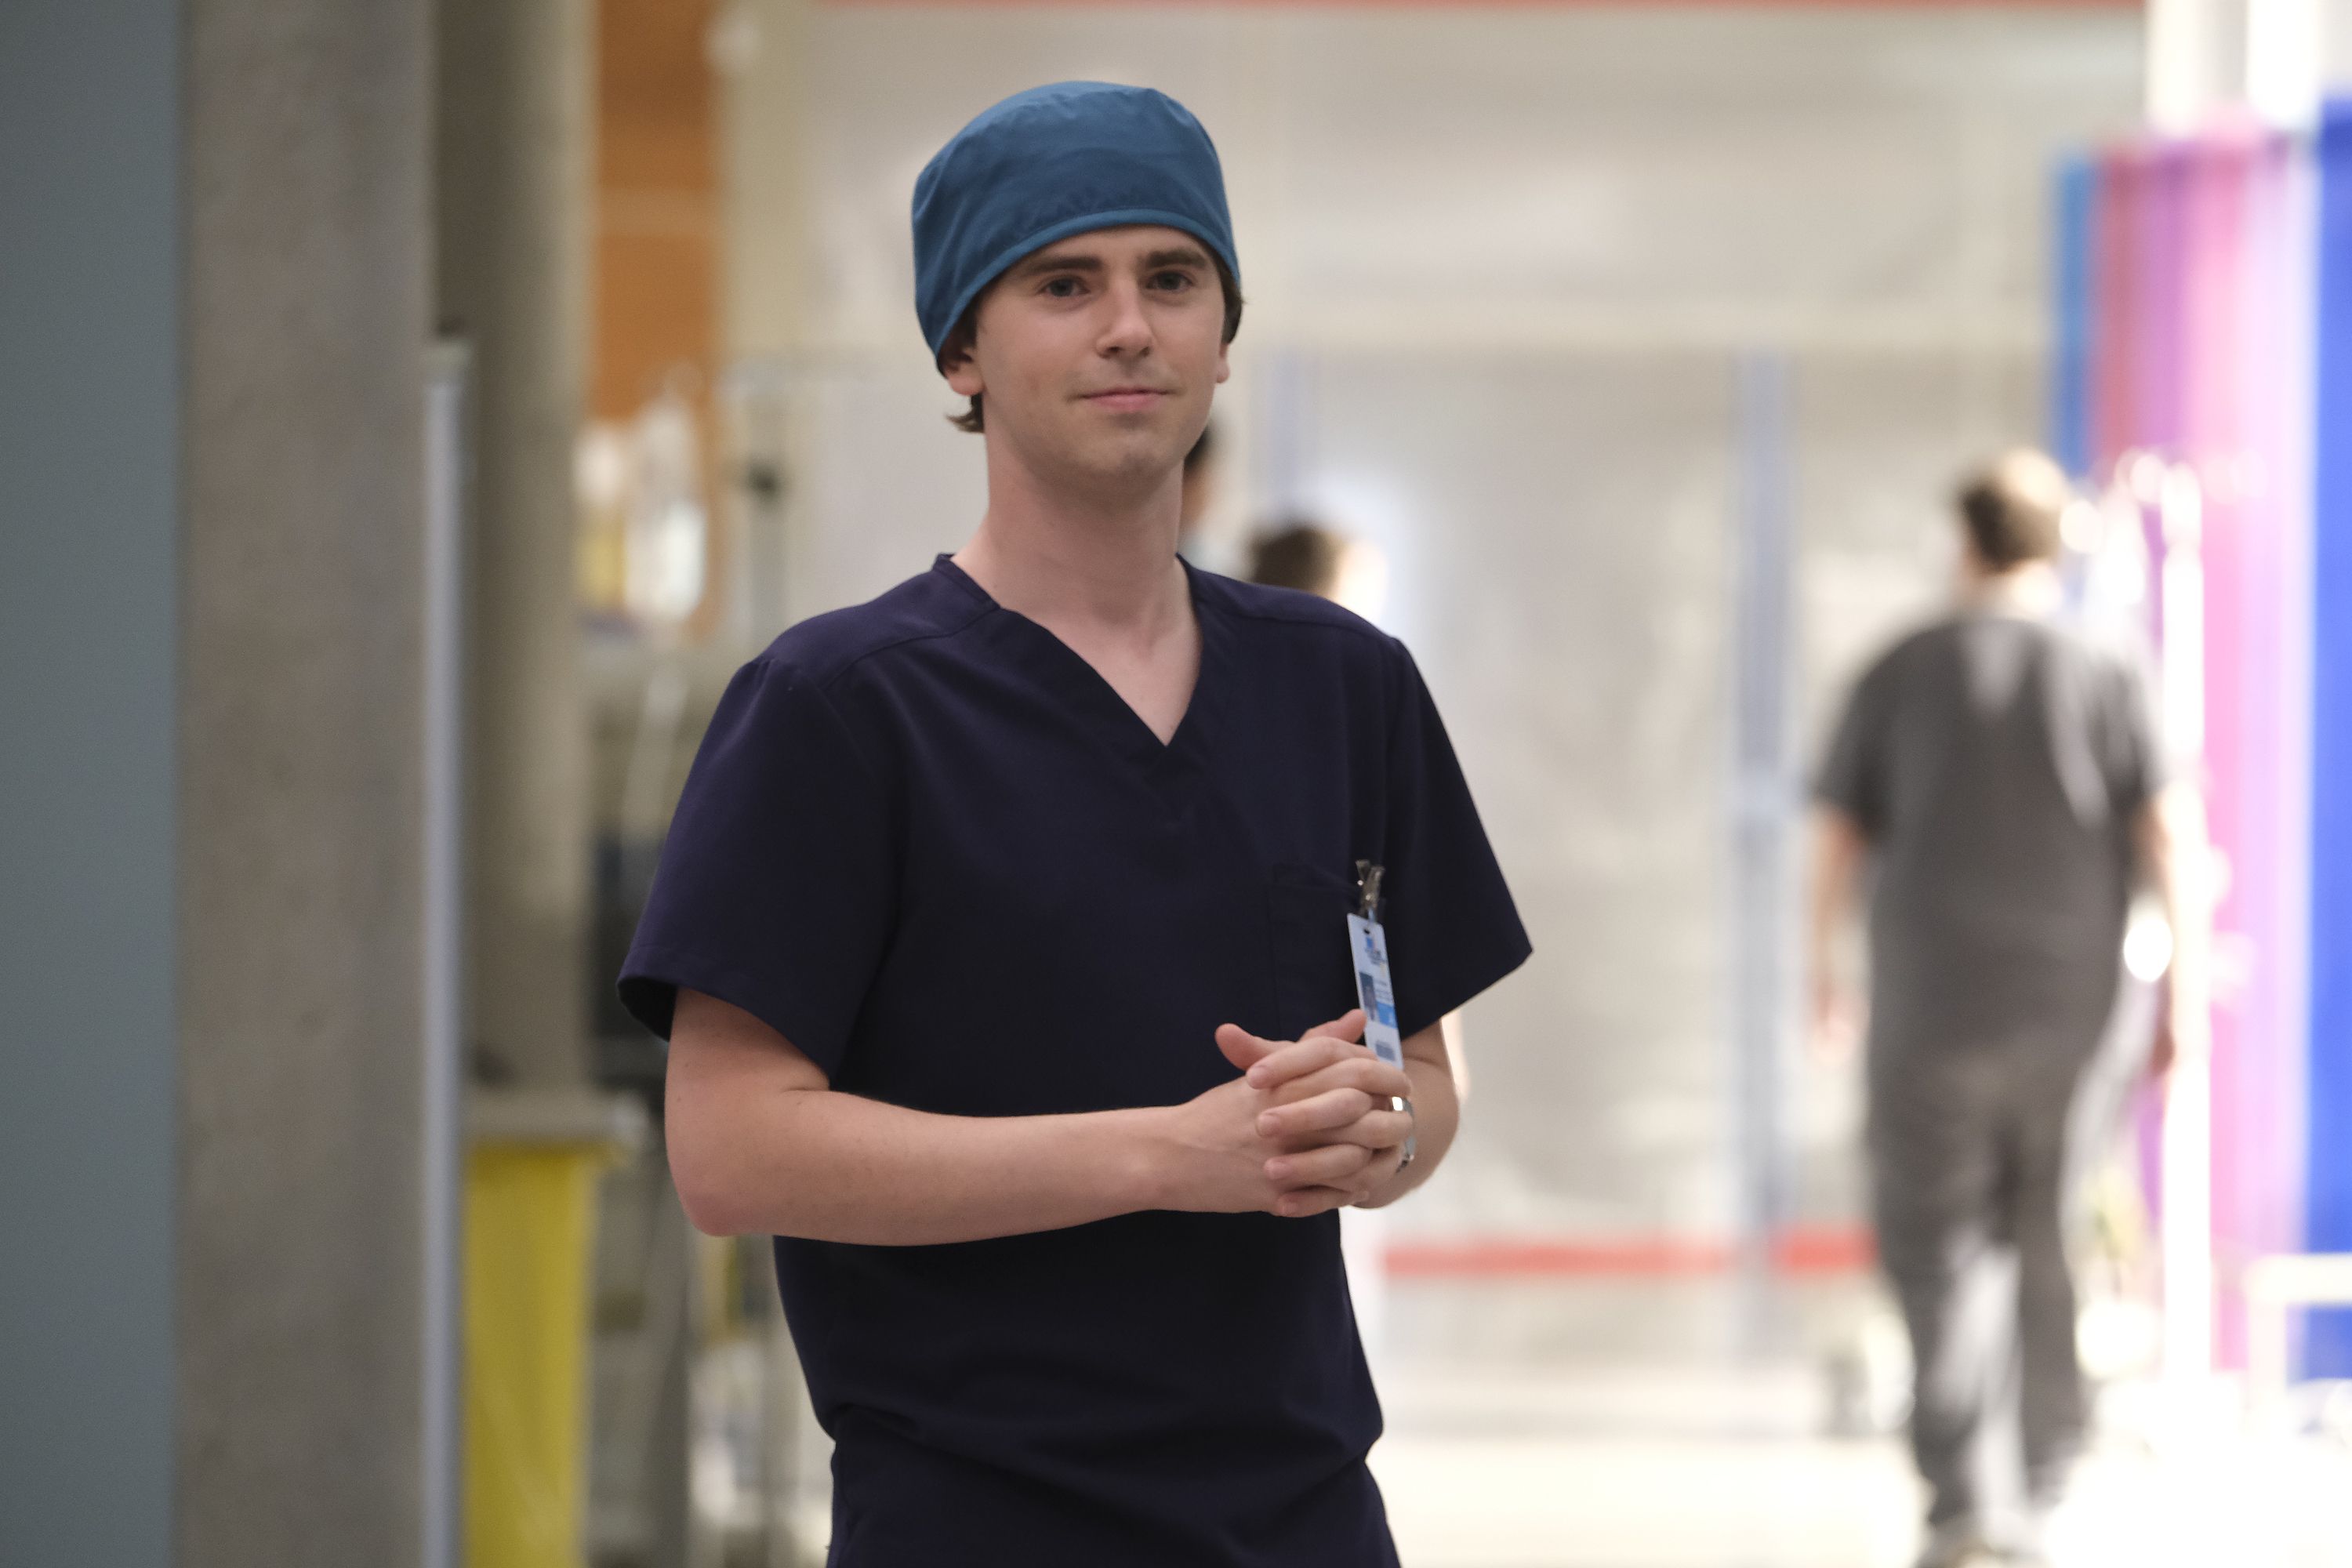 The Good Doctor' Season 5: News, Premiere Date, Cast, Spoilers, Episodes